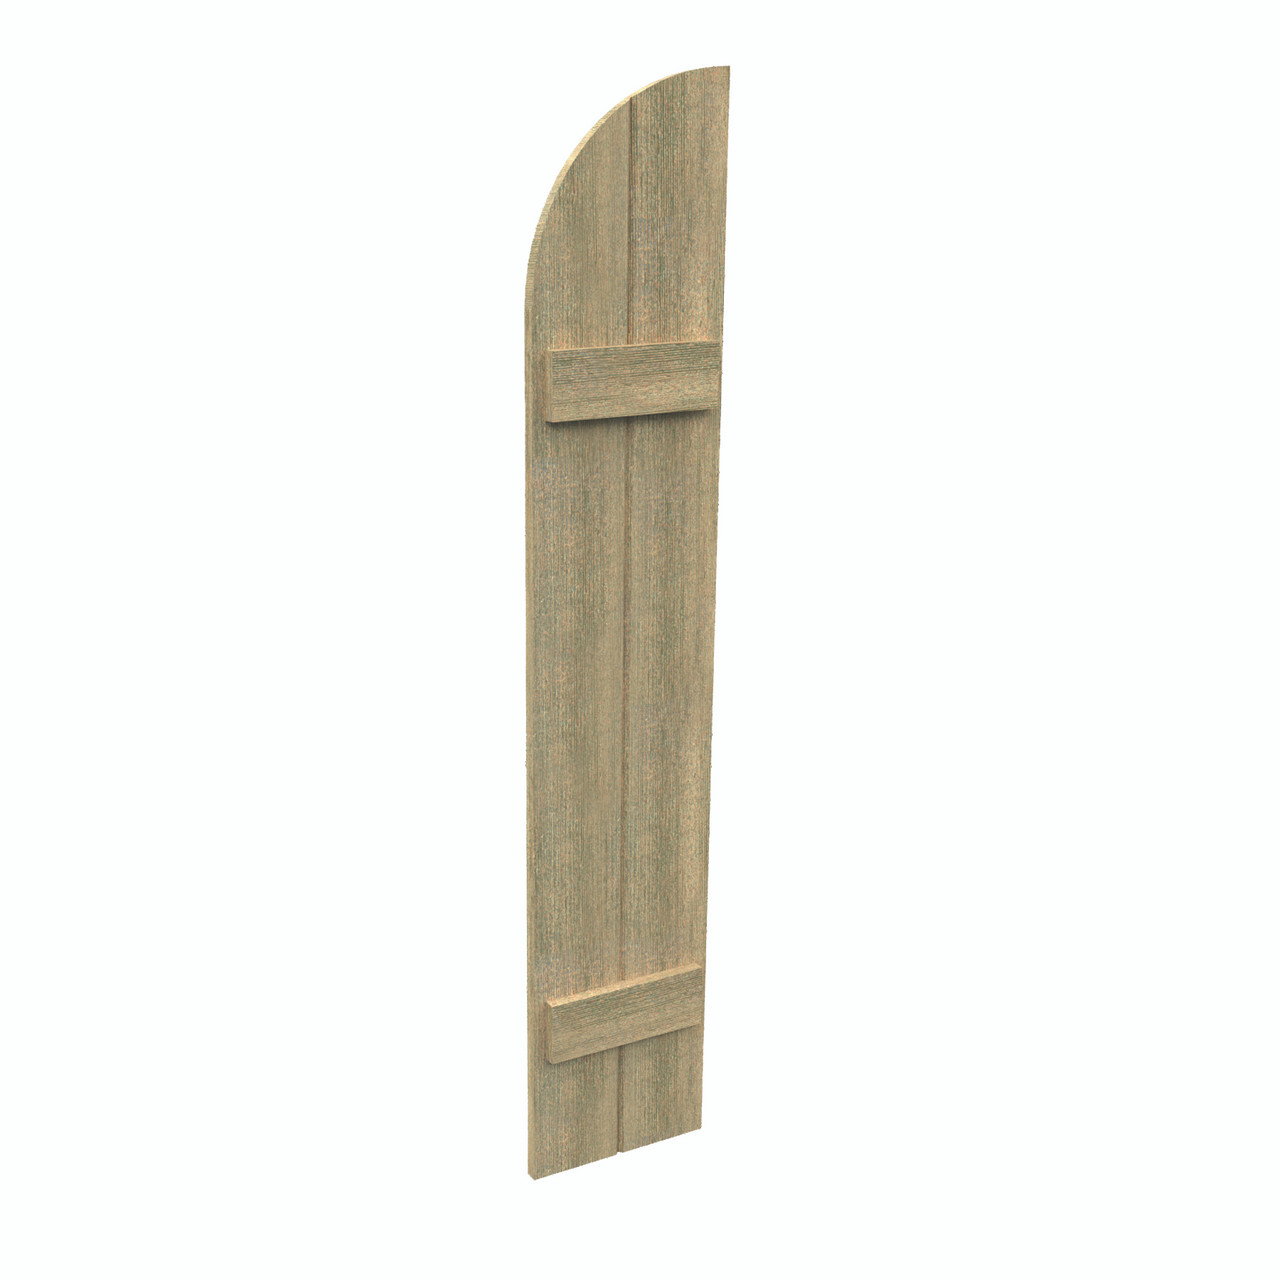 12 inch by 62 inch Quarter Round Shutter with 2-Boards